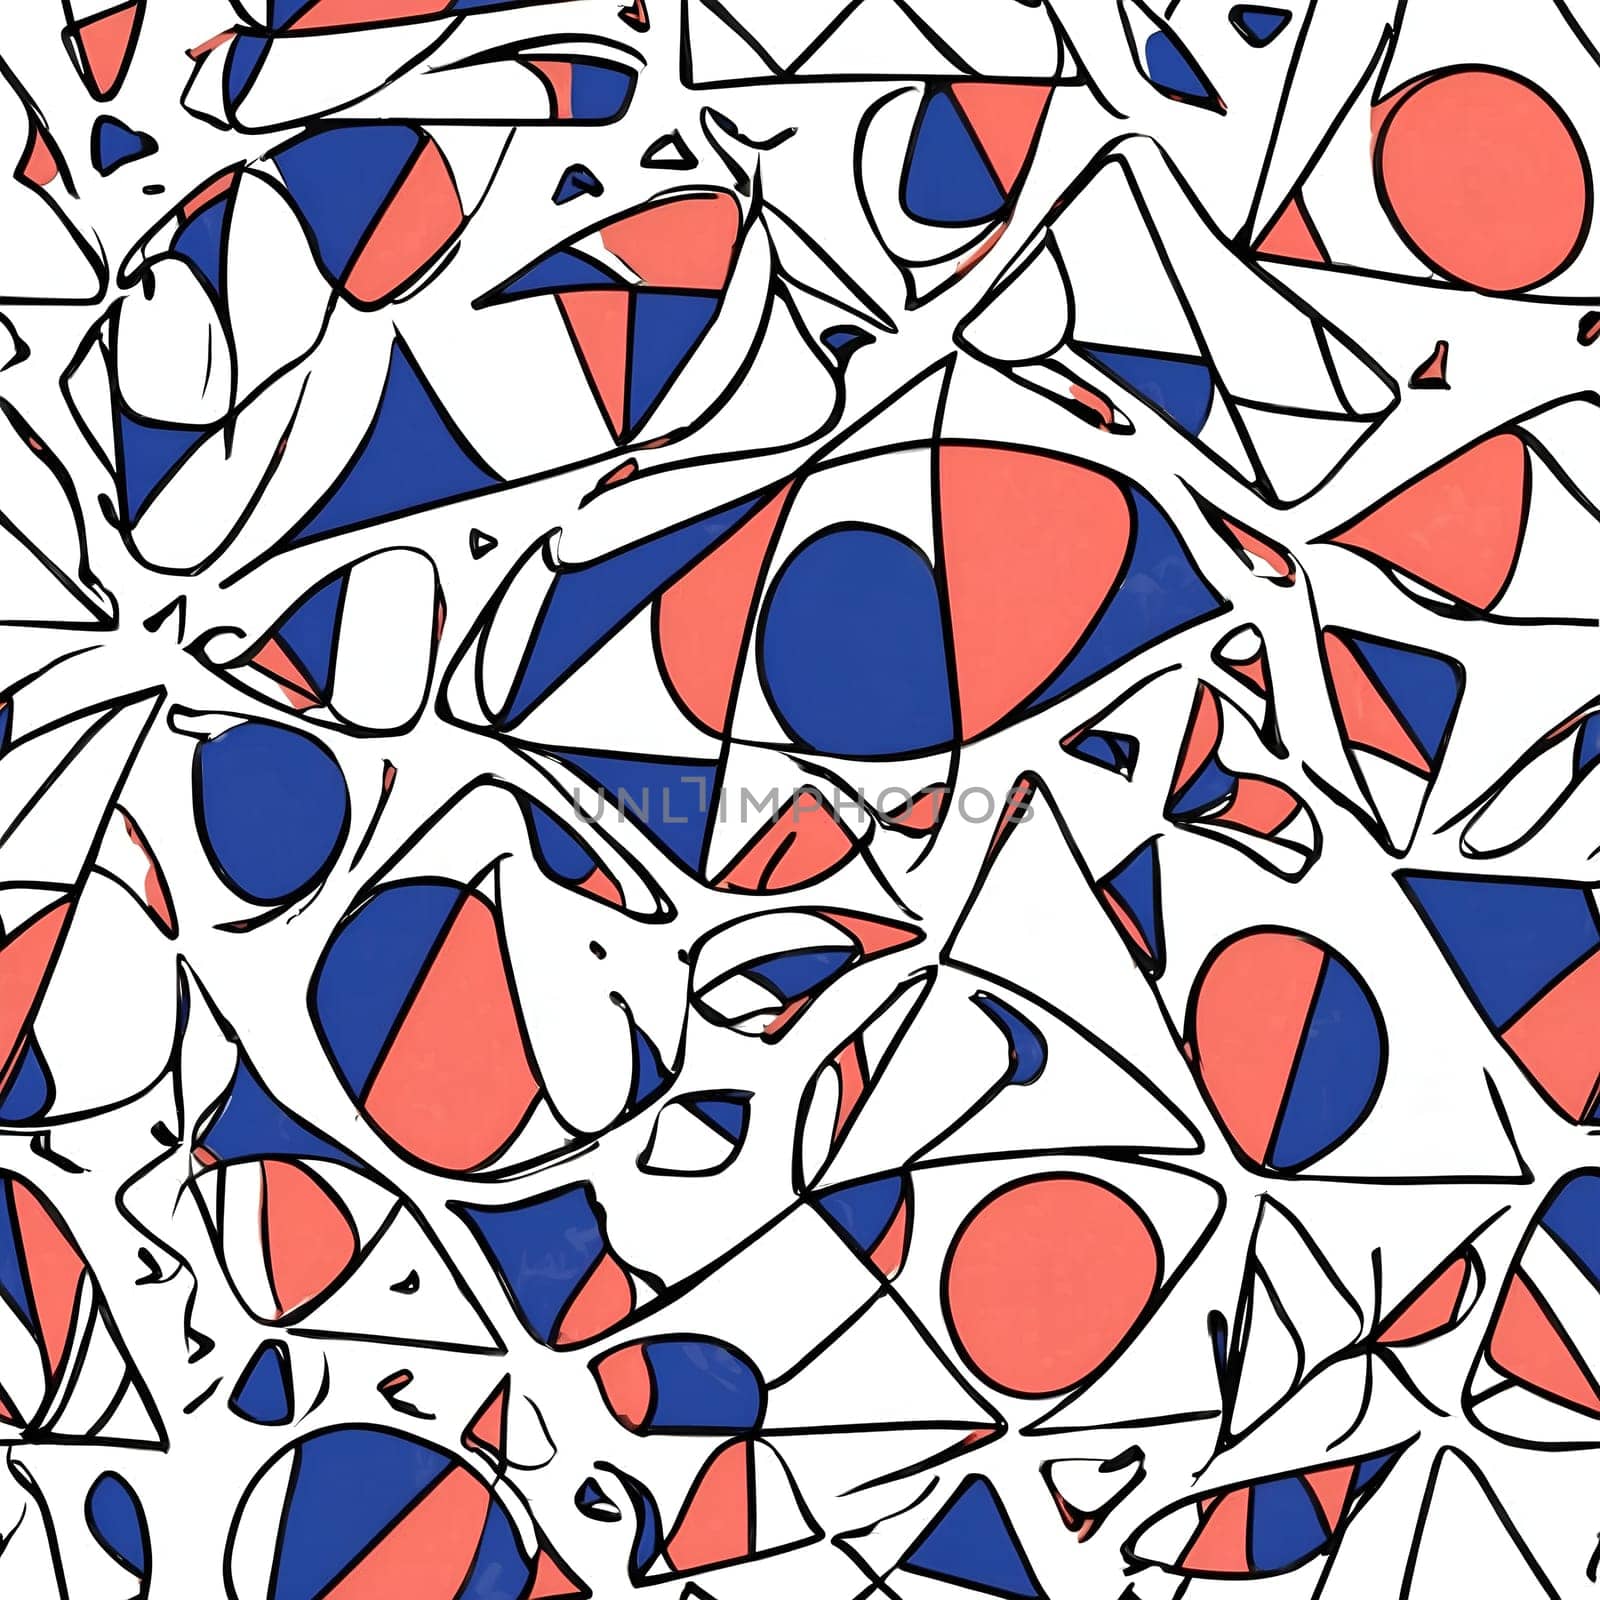 A seamless pattern showcasing an abstract painting with blue, red, and white shapes.